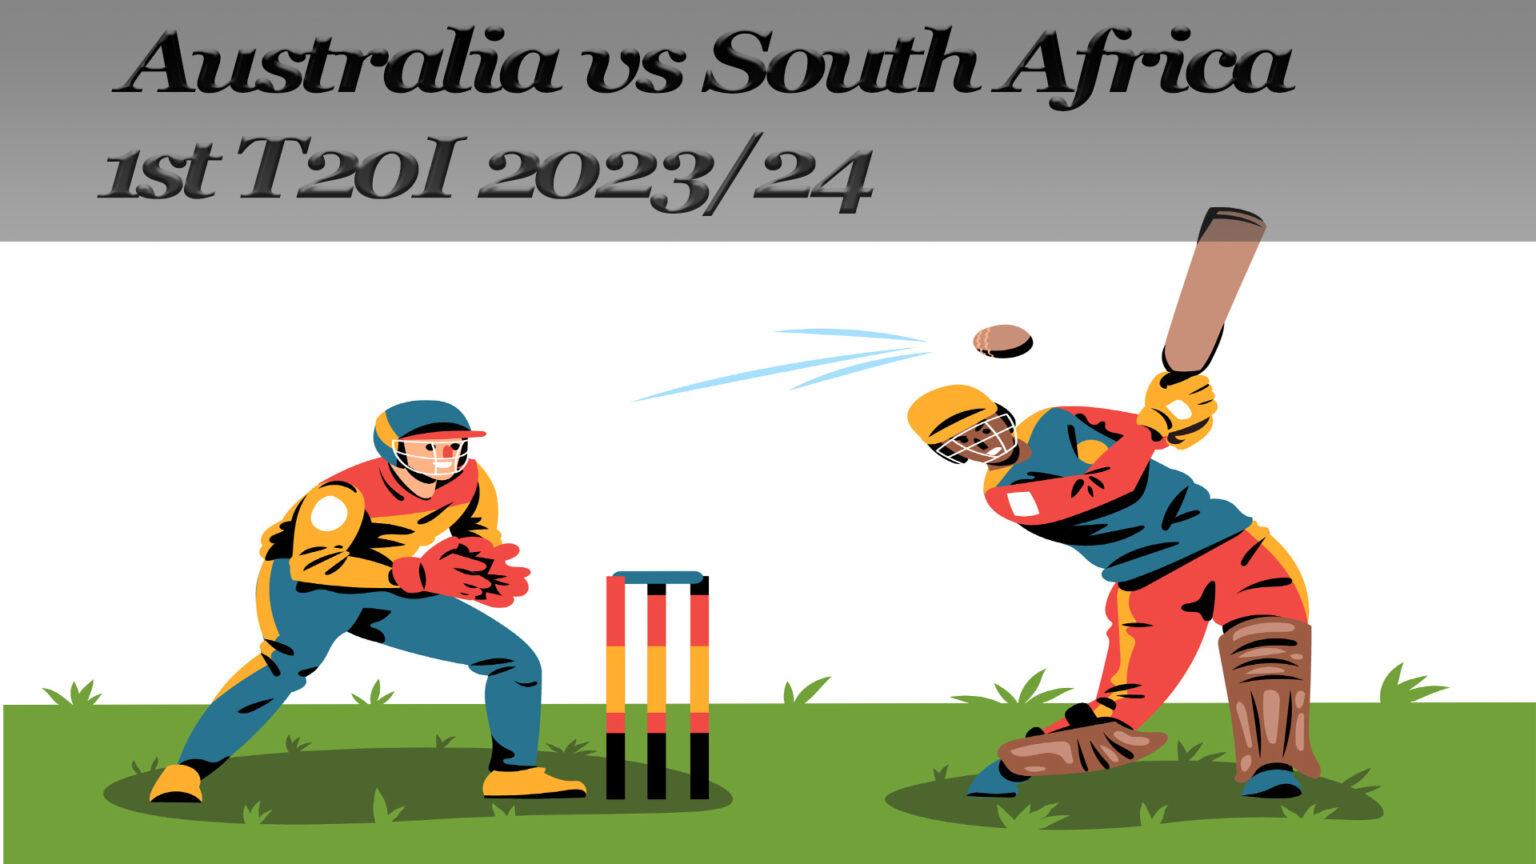 South Africa Elects to Field Against Australia in T20 Clash